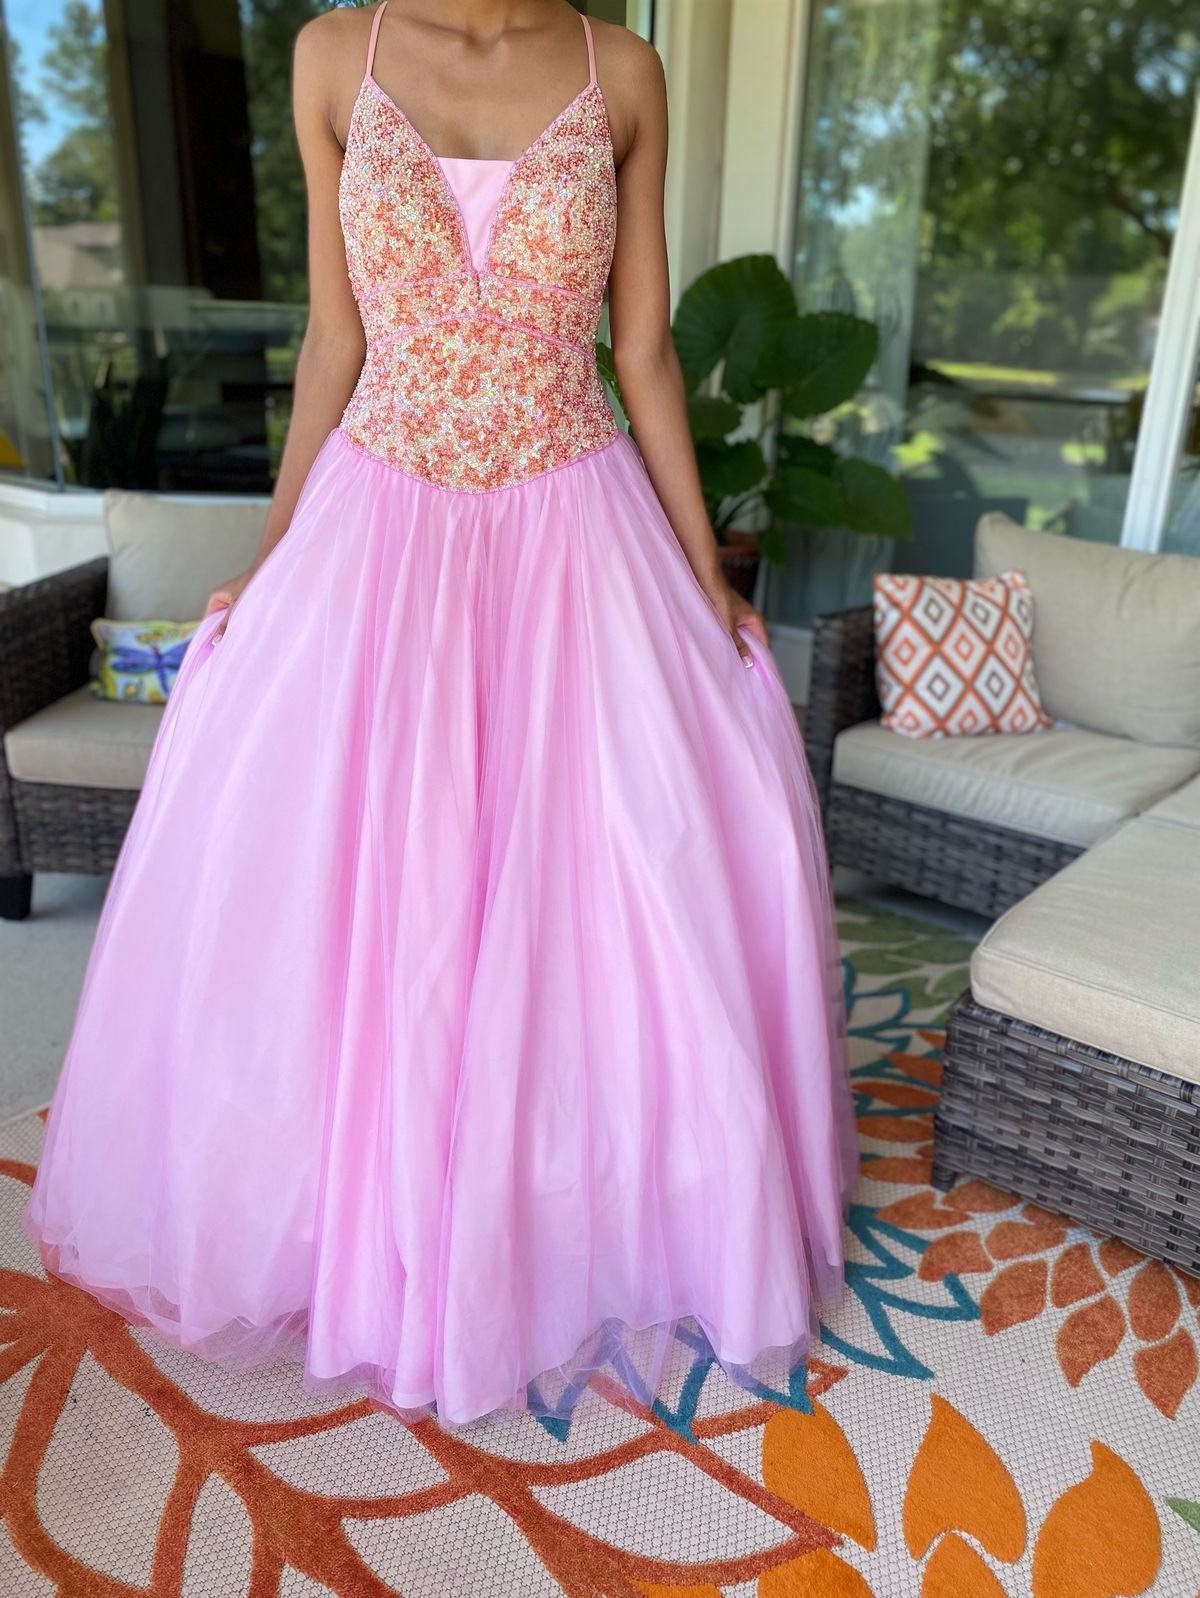 Pink Lace Princess Sweetheart Neckline Evening Gown With Crystal Bling And  Backless Design High Quality Formal Wear For Sweet 16 Girls, Knee Length  From Lovemydress, $95.5 | DHgate.Com